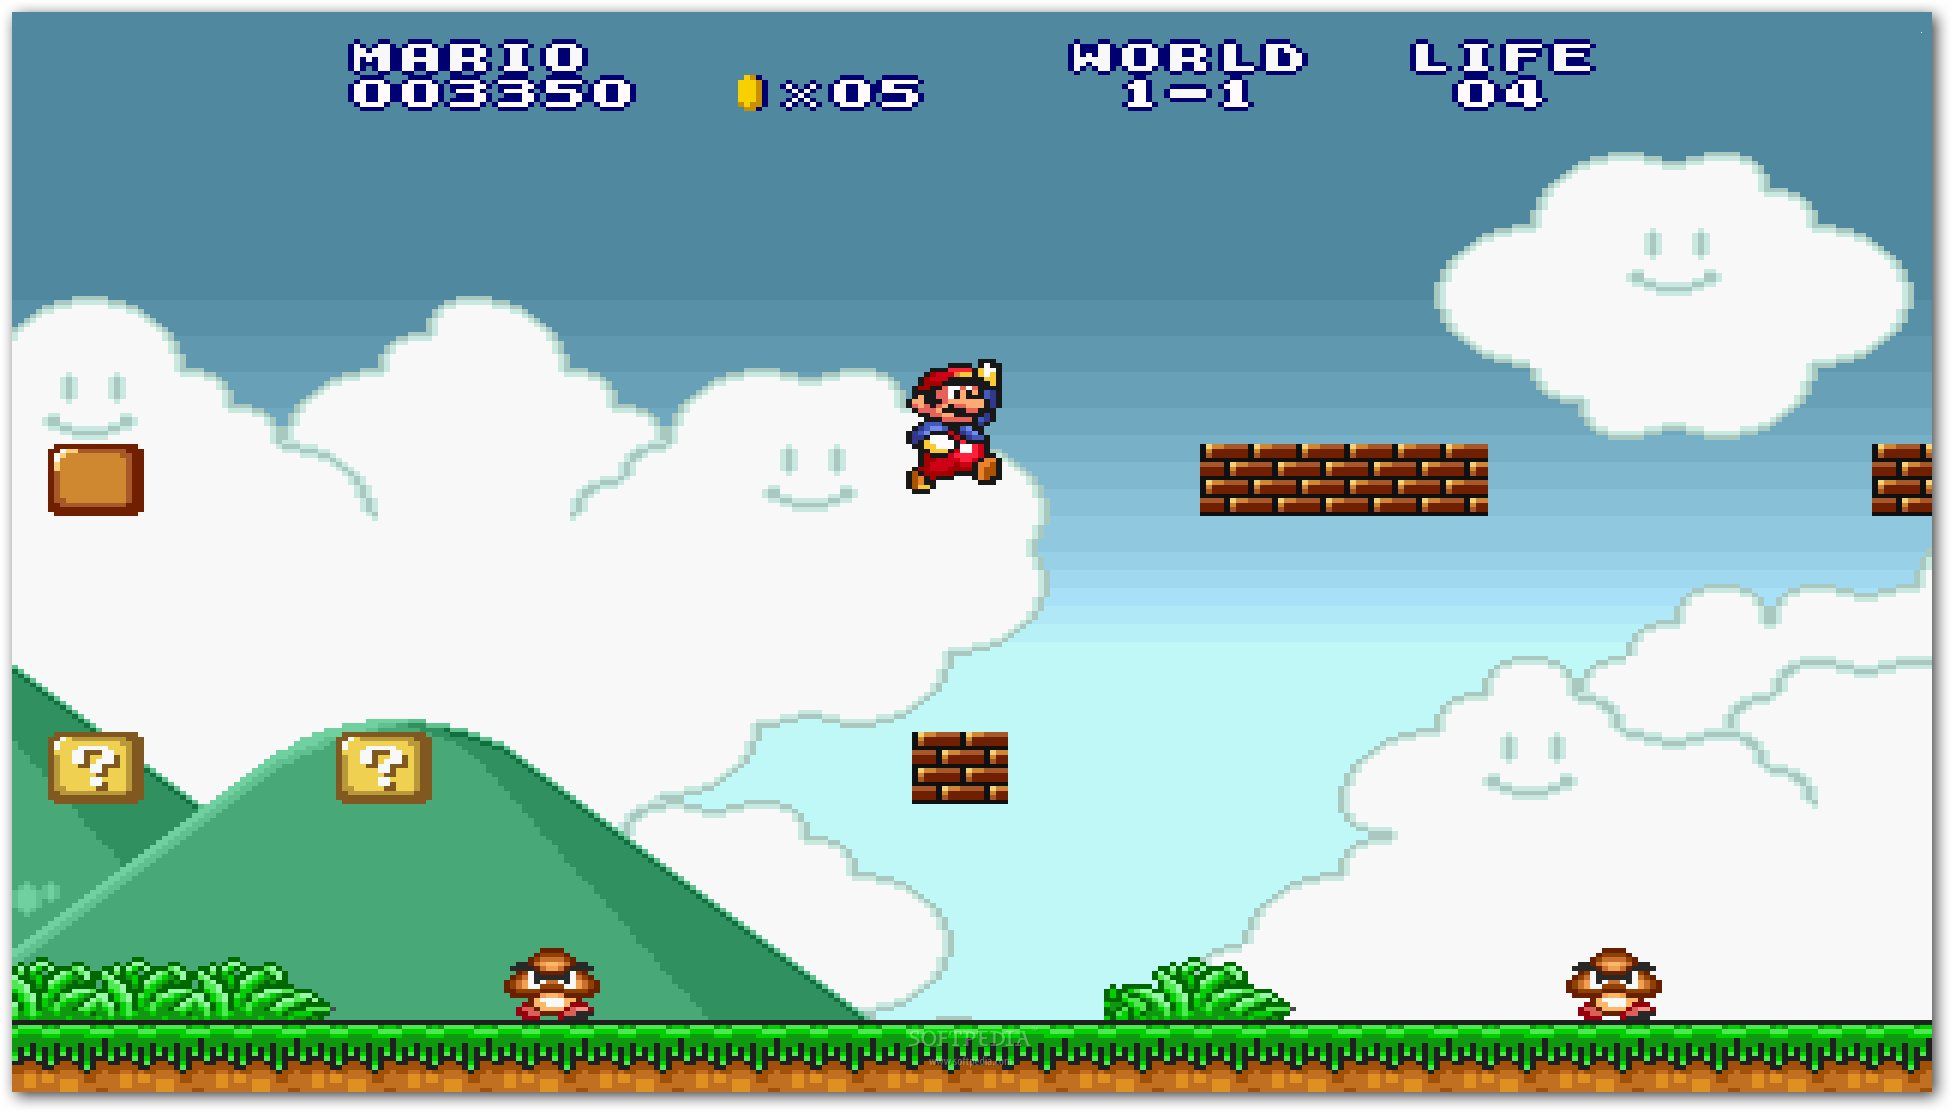 29 Super Mario Bros. 3 HD Wallpapers | Backgrounds - Wallpaper Abyss